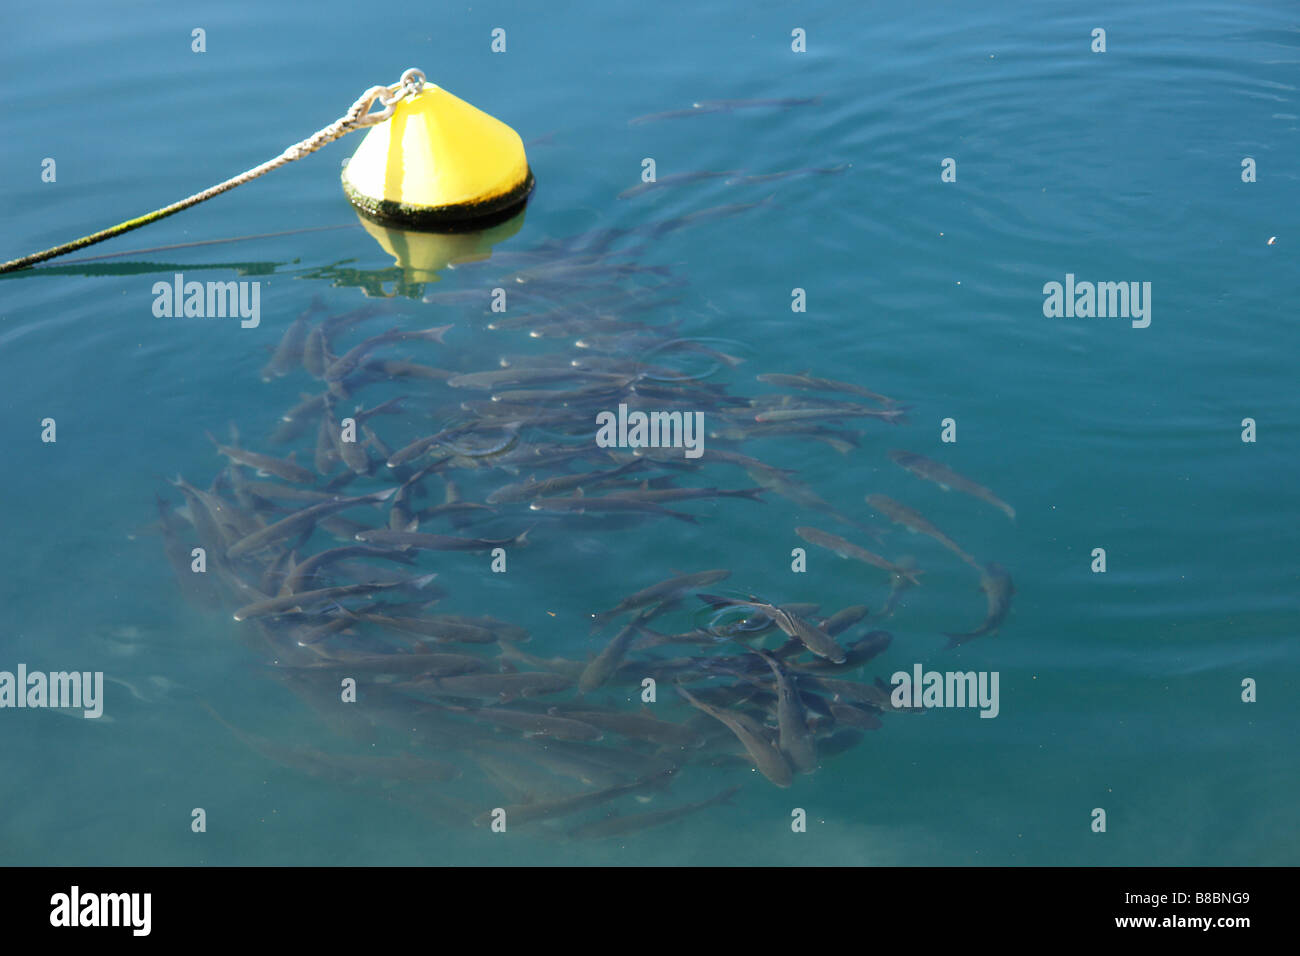 a shoal and a bouy Stock Photo